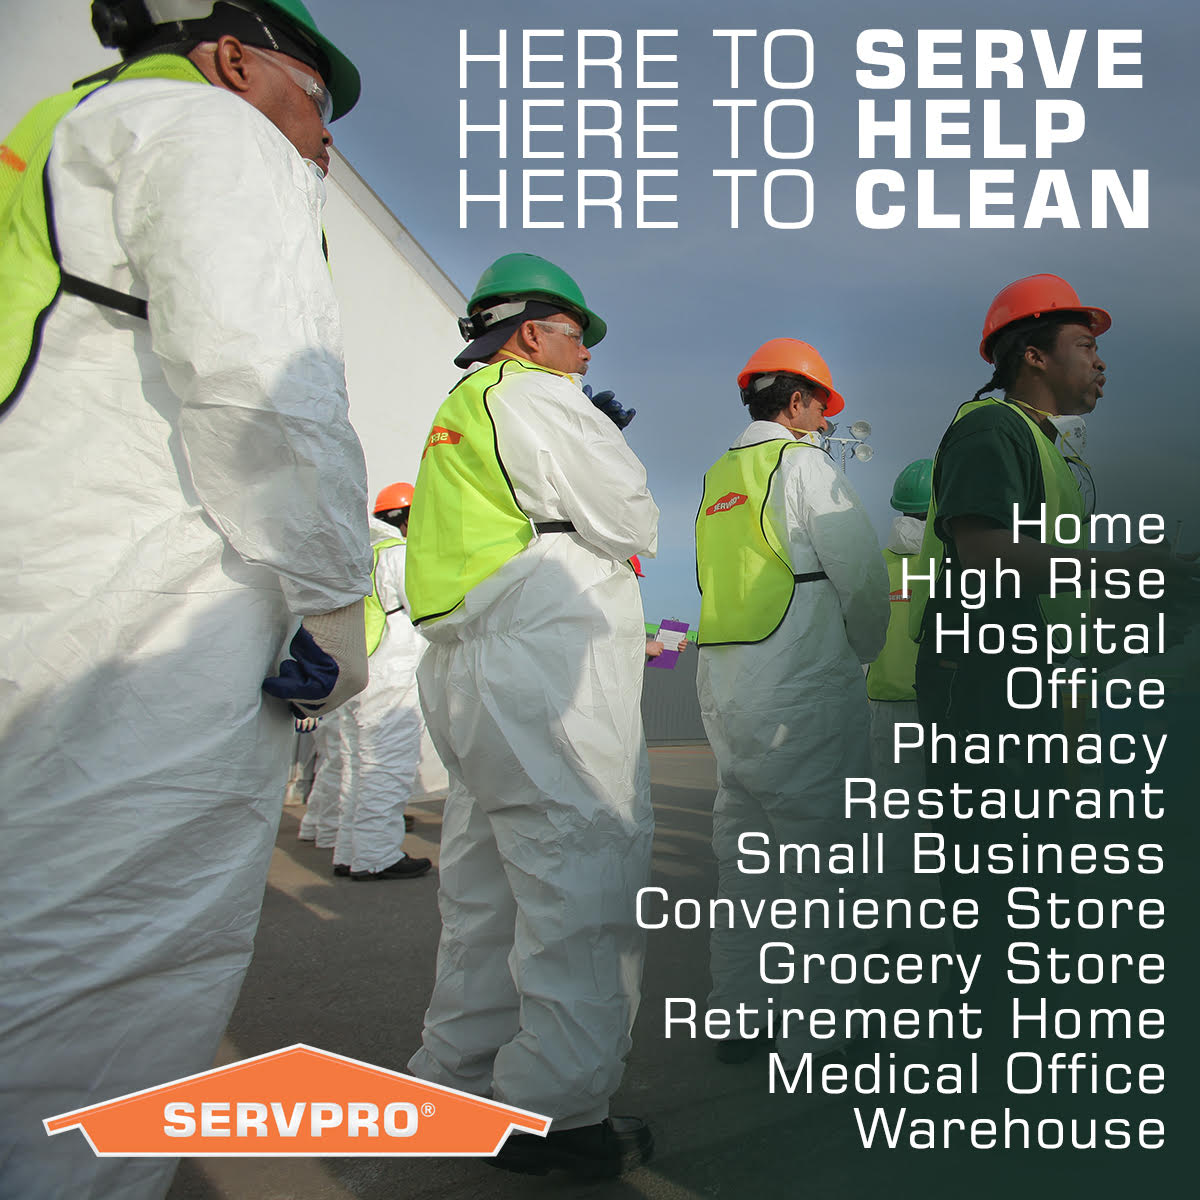 SERVPRO professionals are trained in adhering to the highest cleaning and sanitation standards.